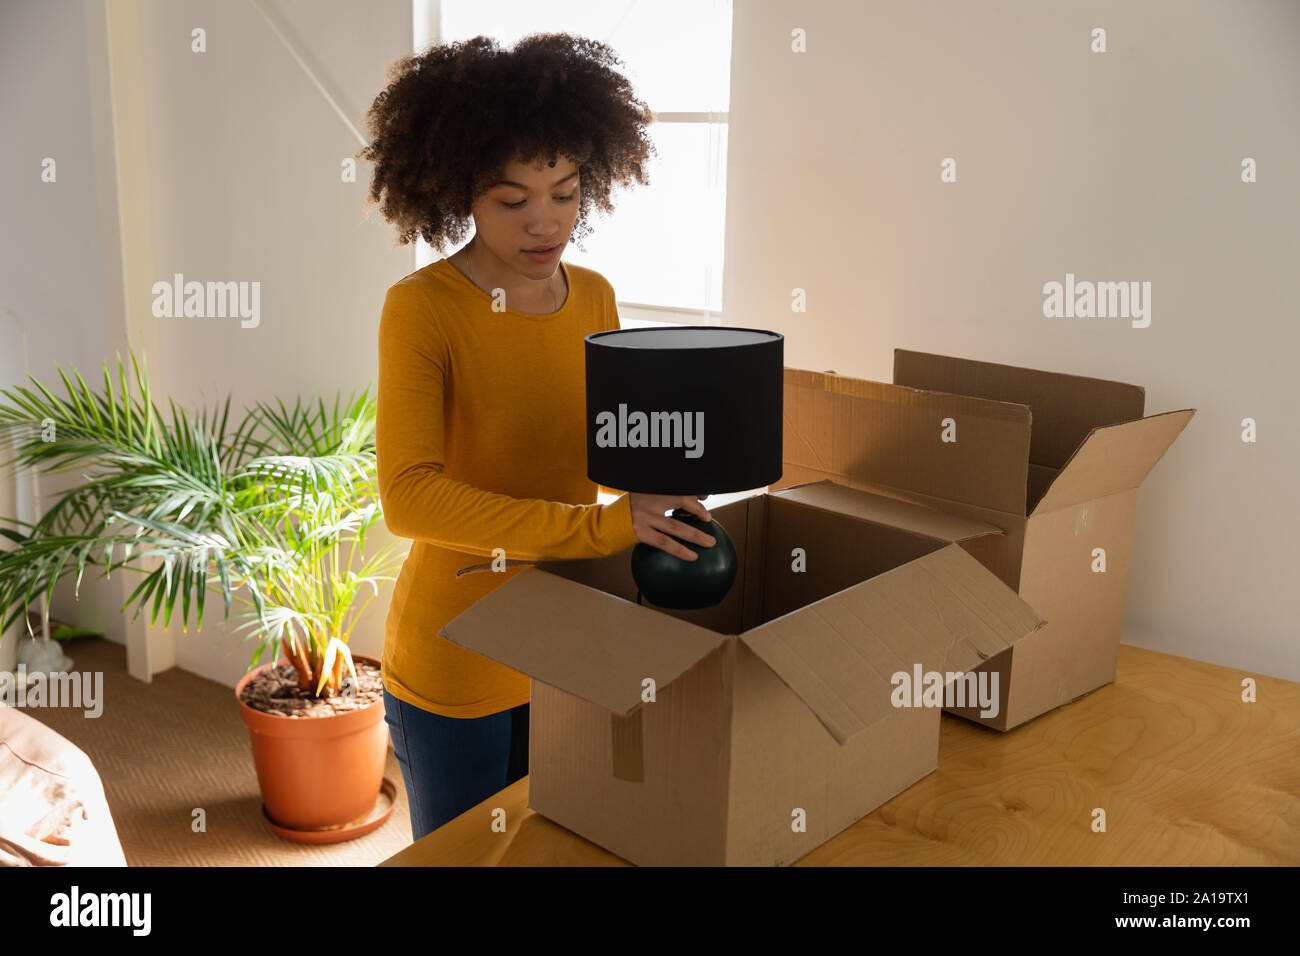 Woman unpacking boxes in an office Stock Photo